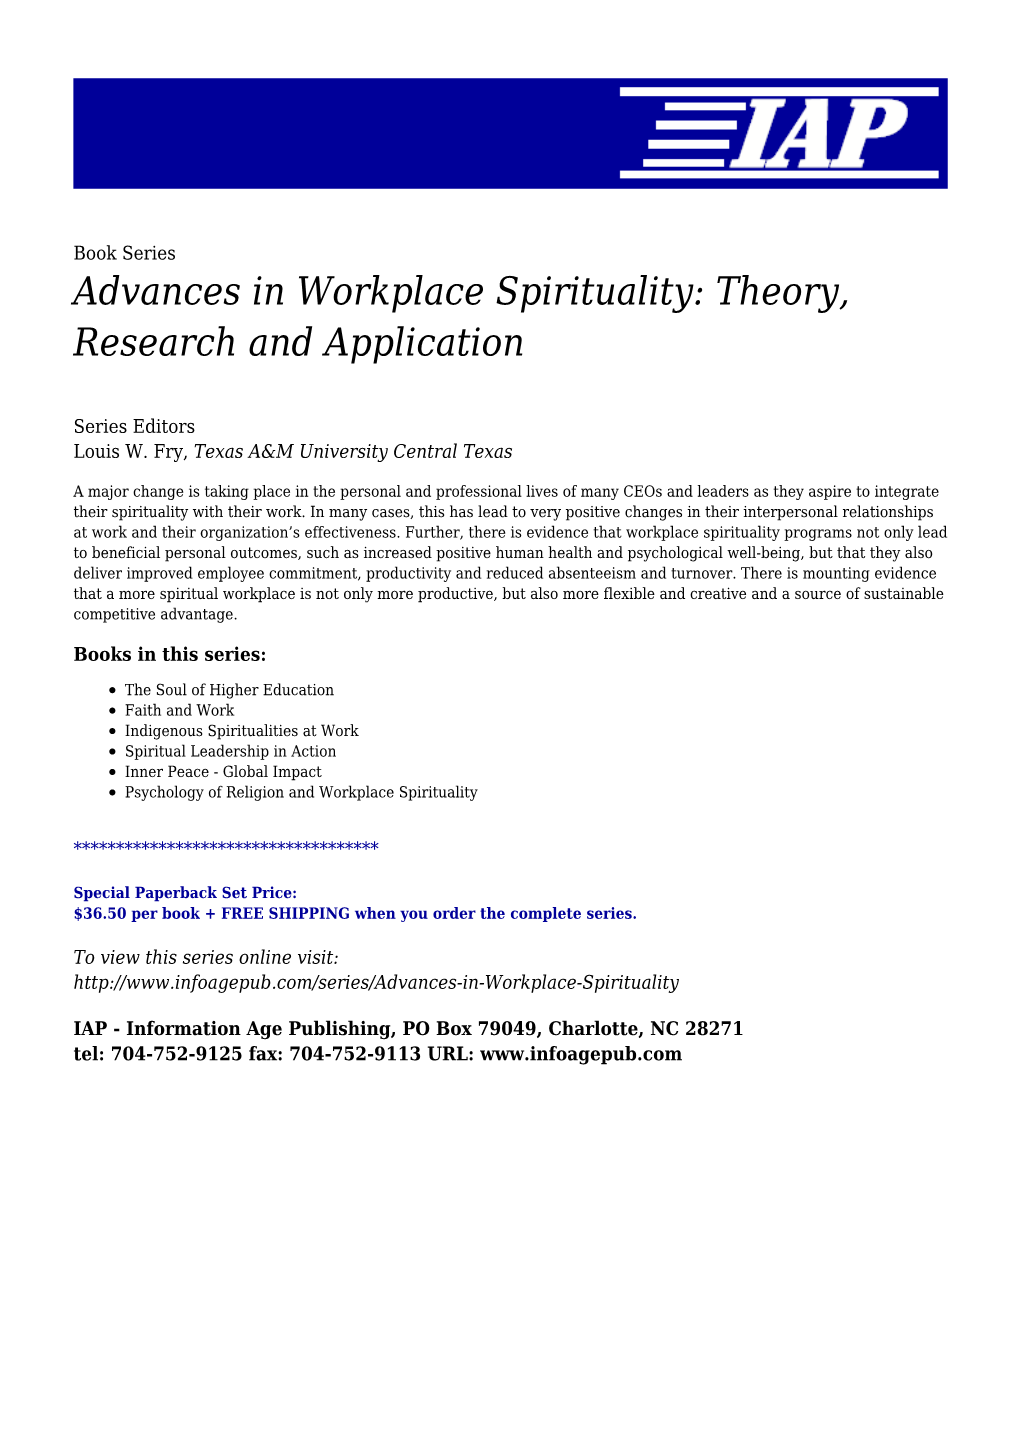 Advances in Workplace Spirituality: Theory, Research and Application